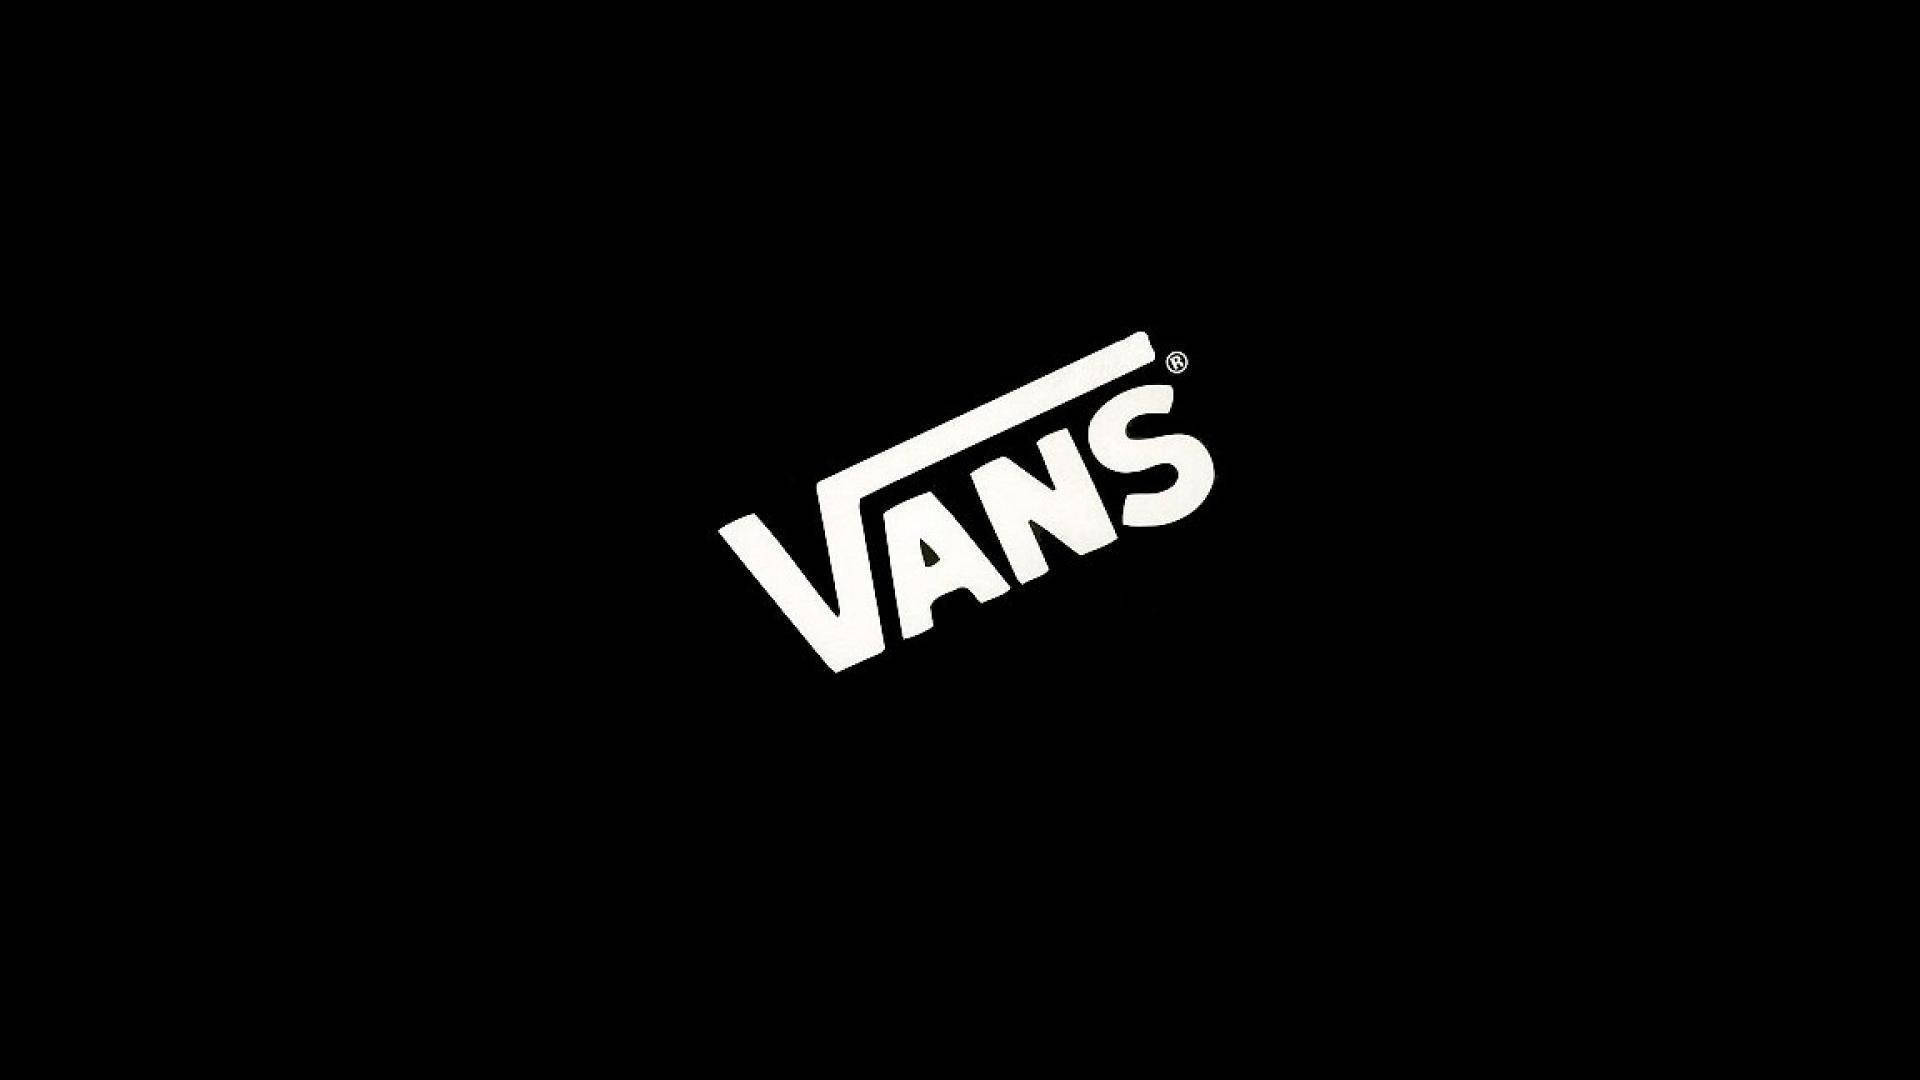 Vans Off The Wall Background Wallpaper